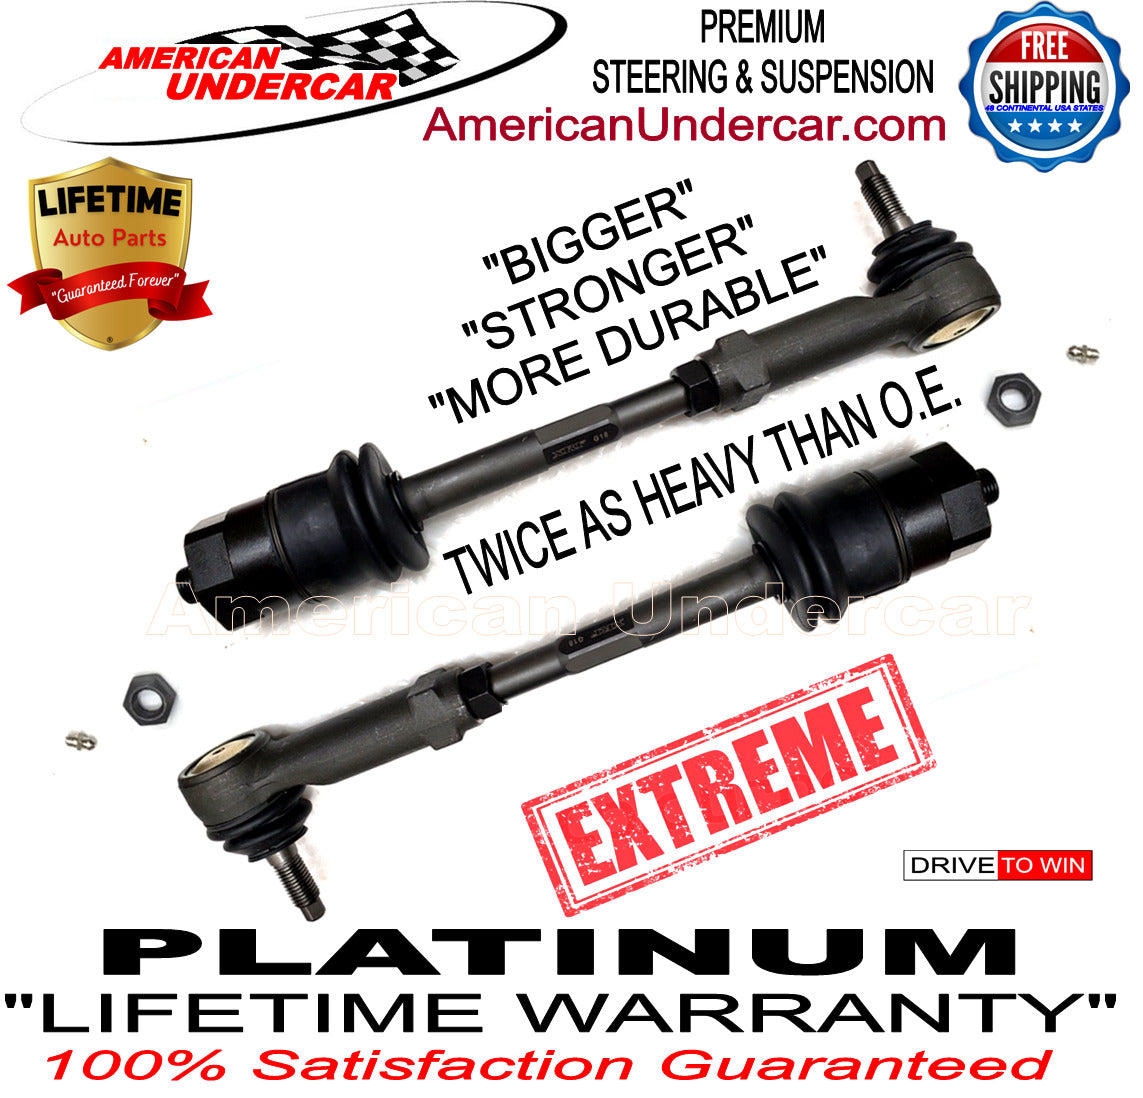 Lifetime Extreme Tie Rod End Combo Steering Kit for 1999-2007 Chevrolet, GMC, Cadillac 2WD, 4x4